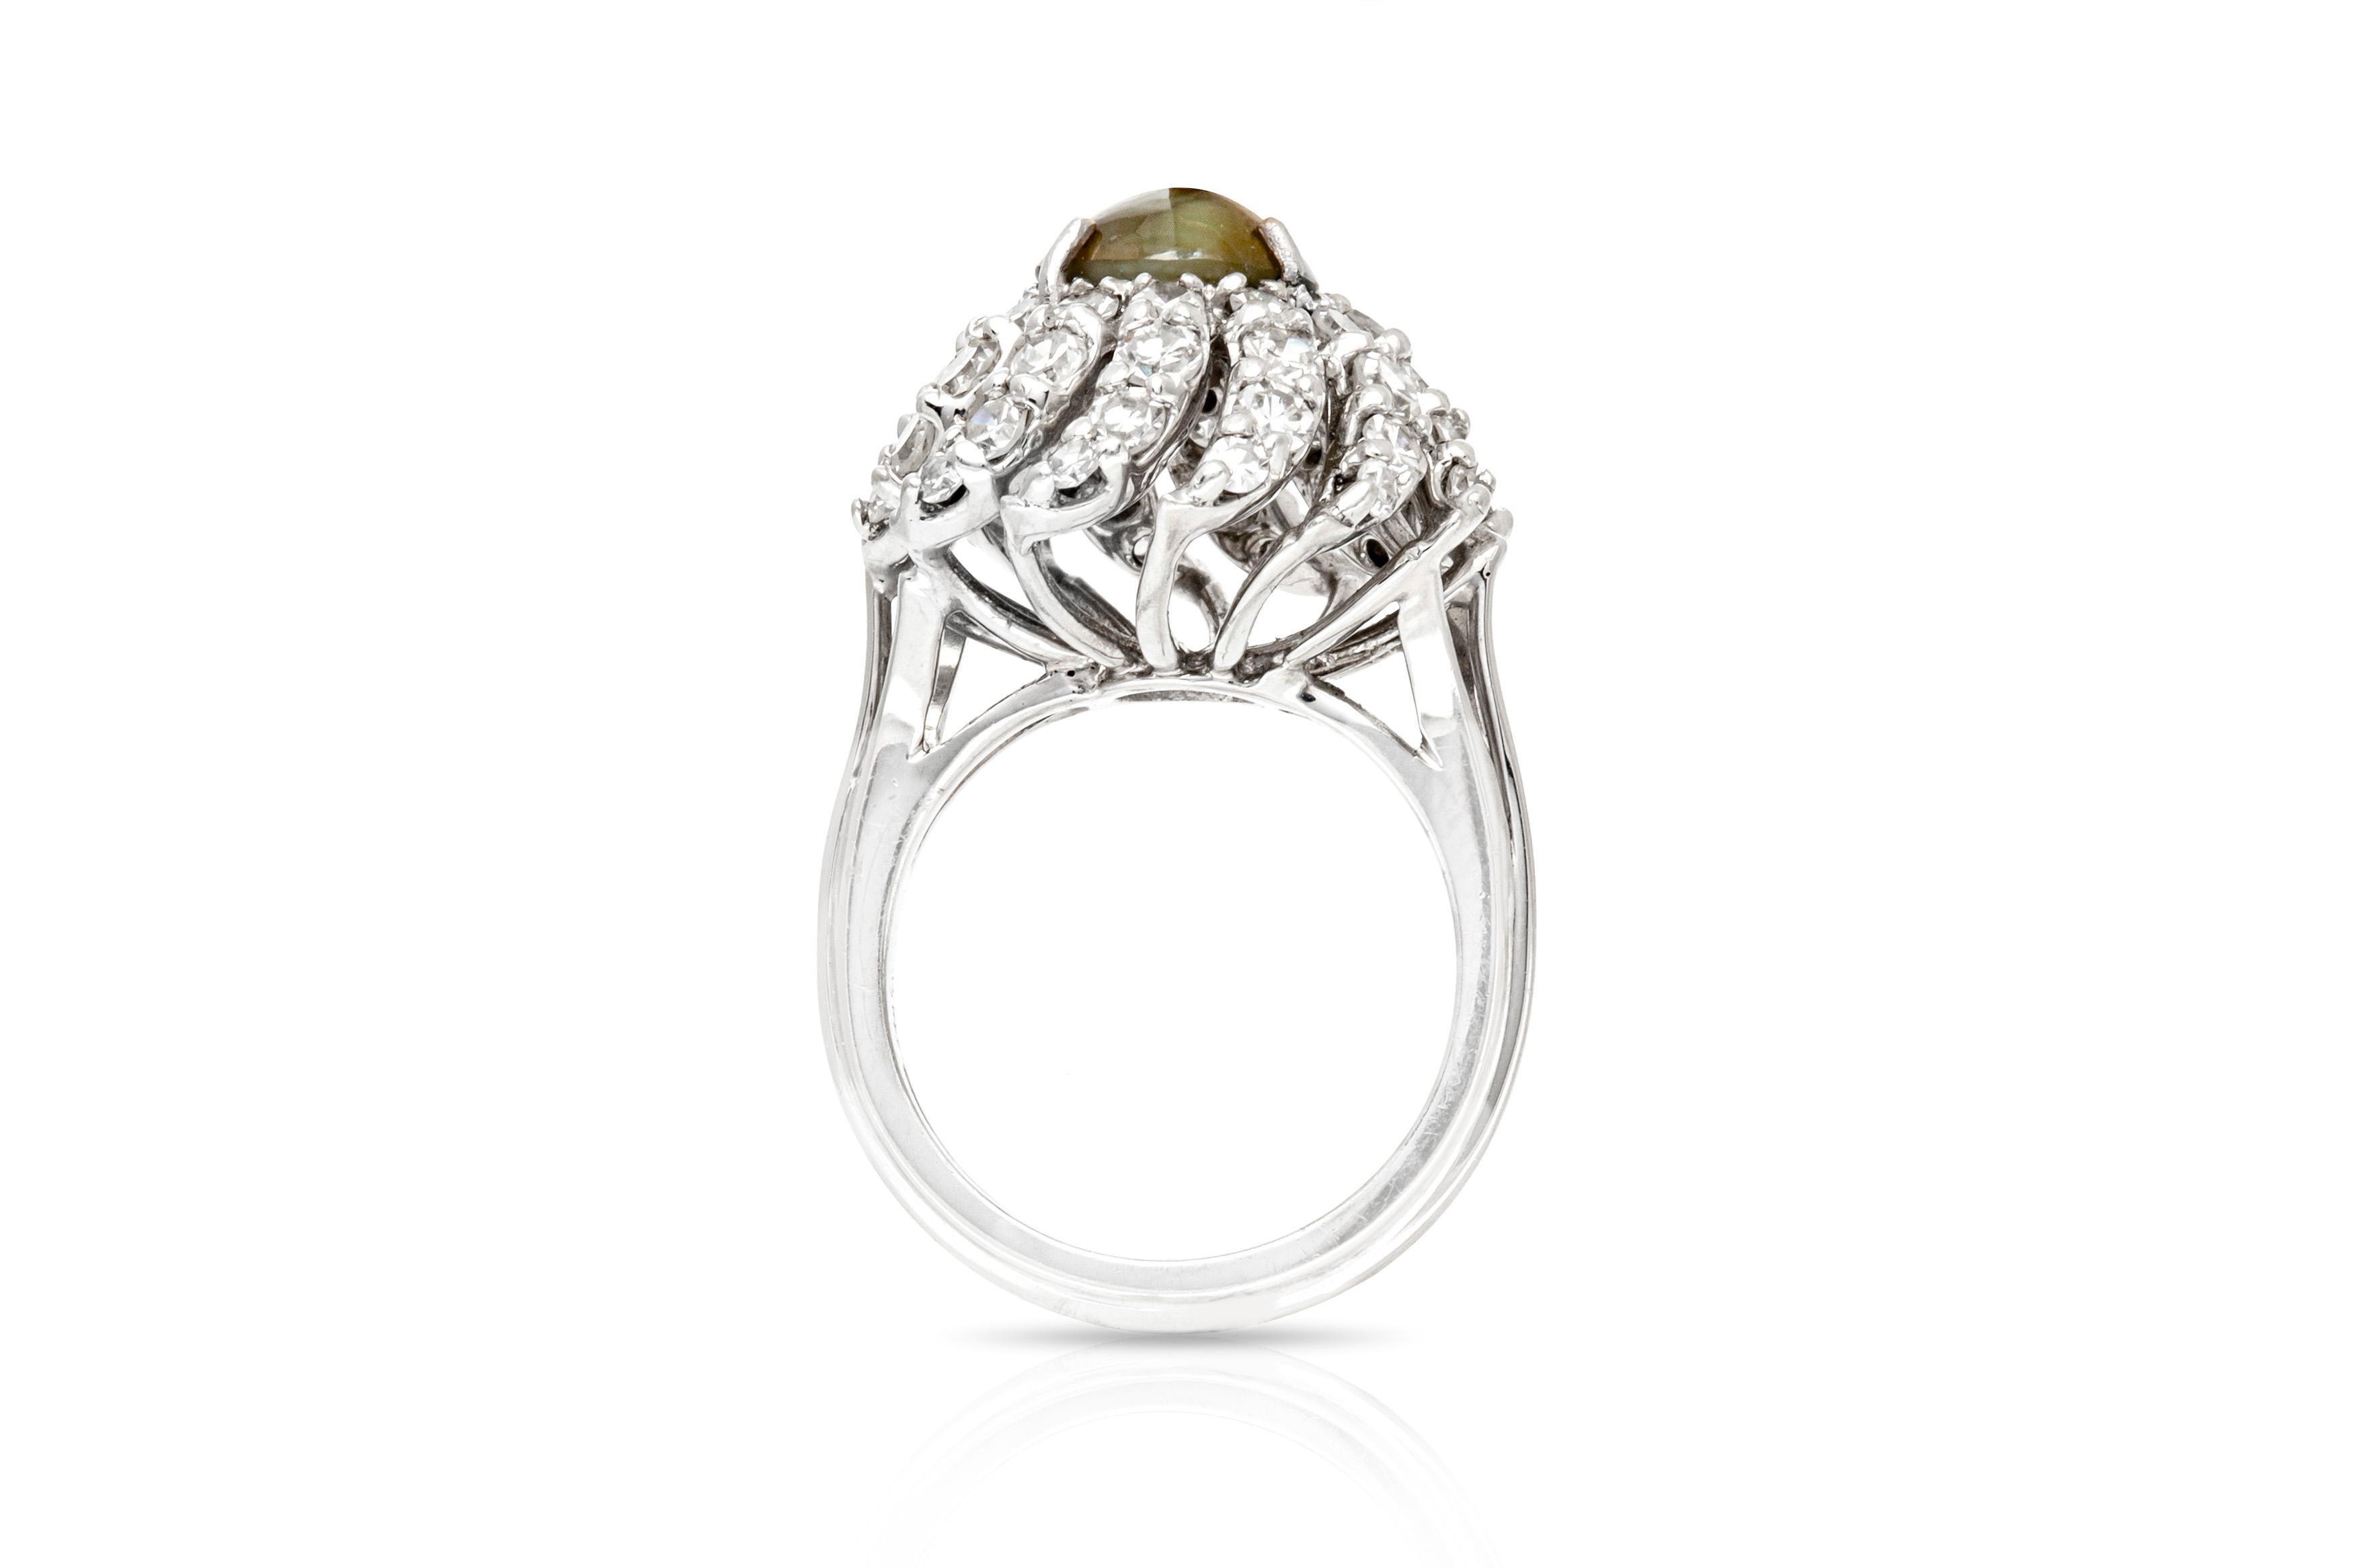 Ring, finally crafted in platinum with a cat eye center stone weighing approximately a total of 2.50 carat and diamonds weighing approximately a total of 2.00 carat. Circa 1950's.